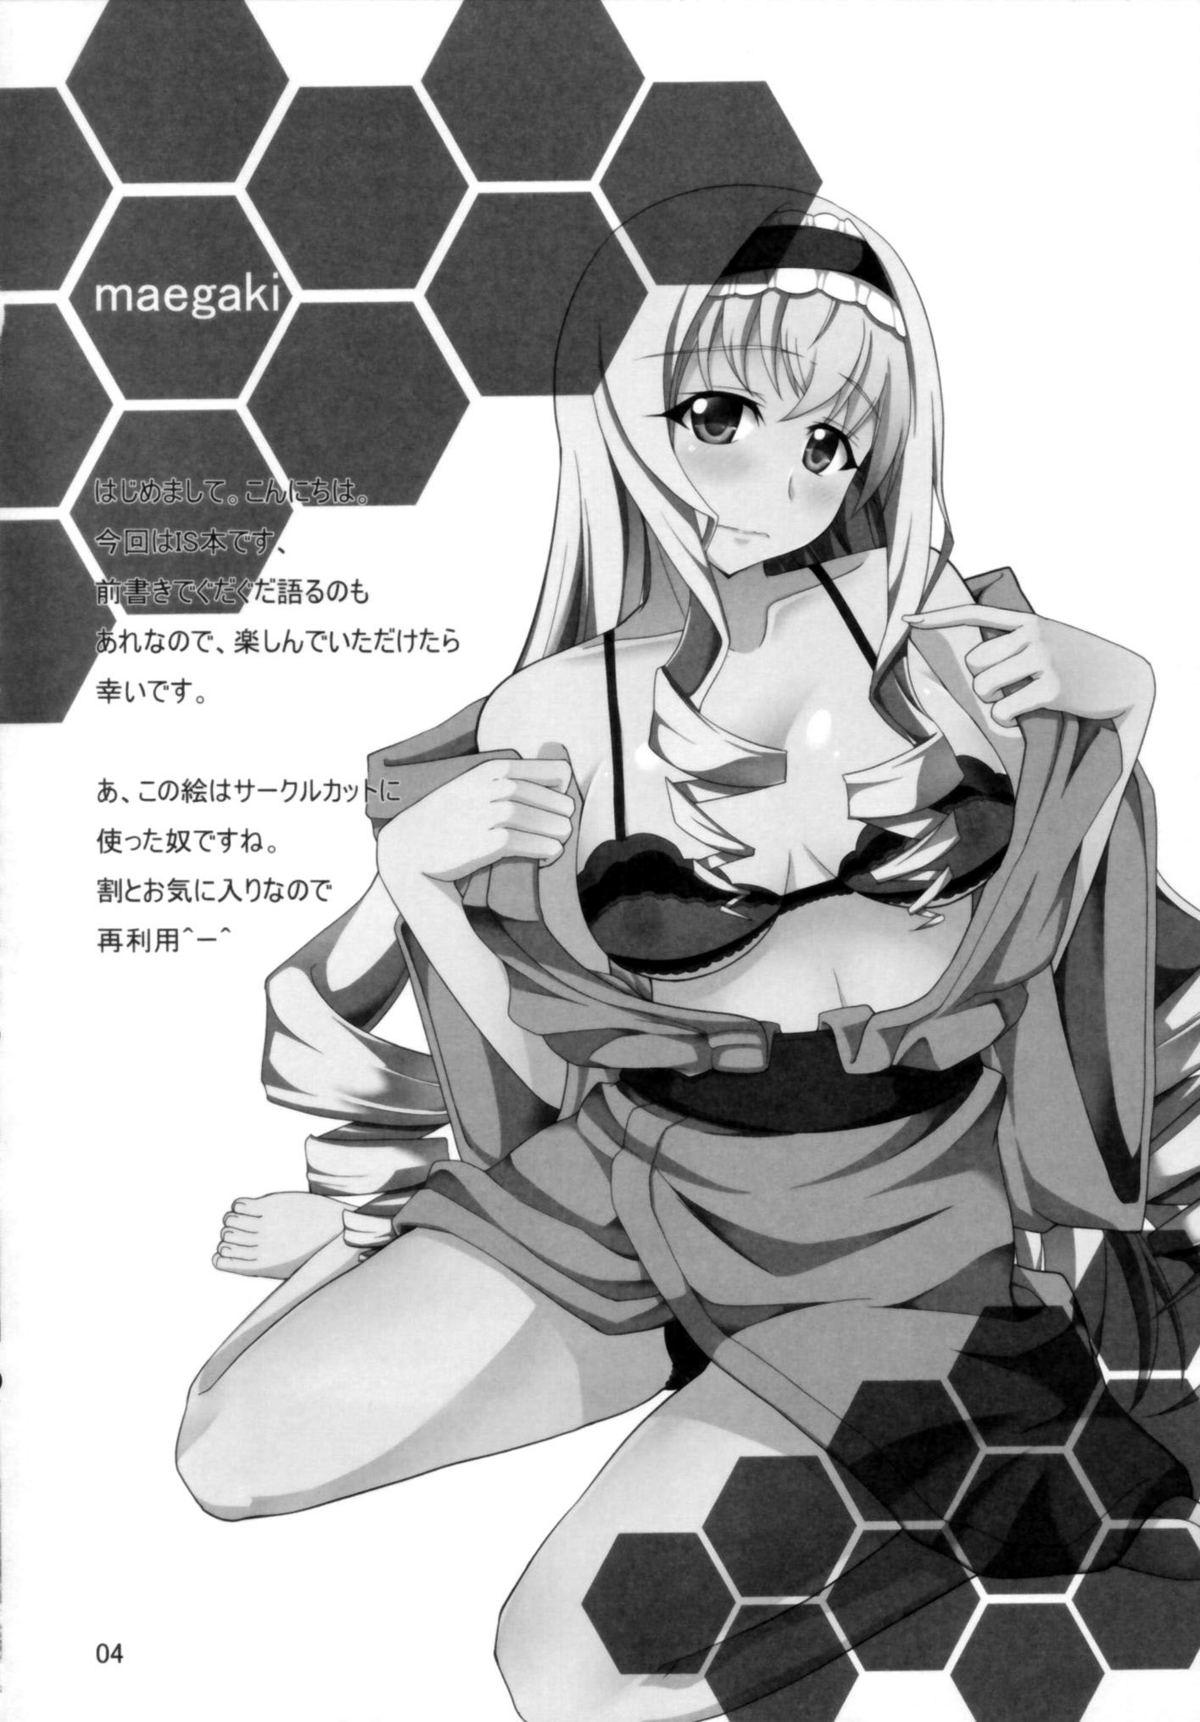 Moms IS - Infinite stratos Flaquita - Page 4